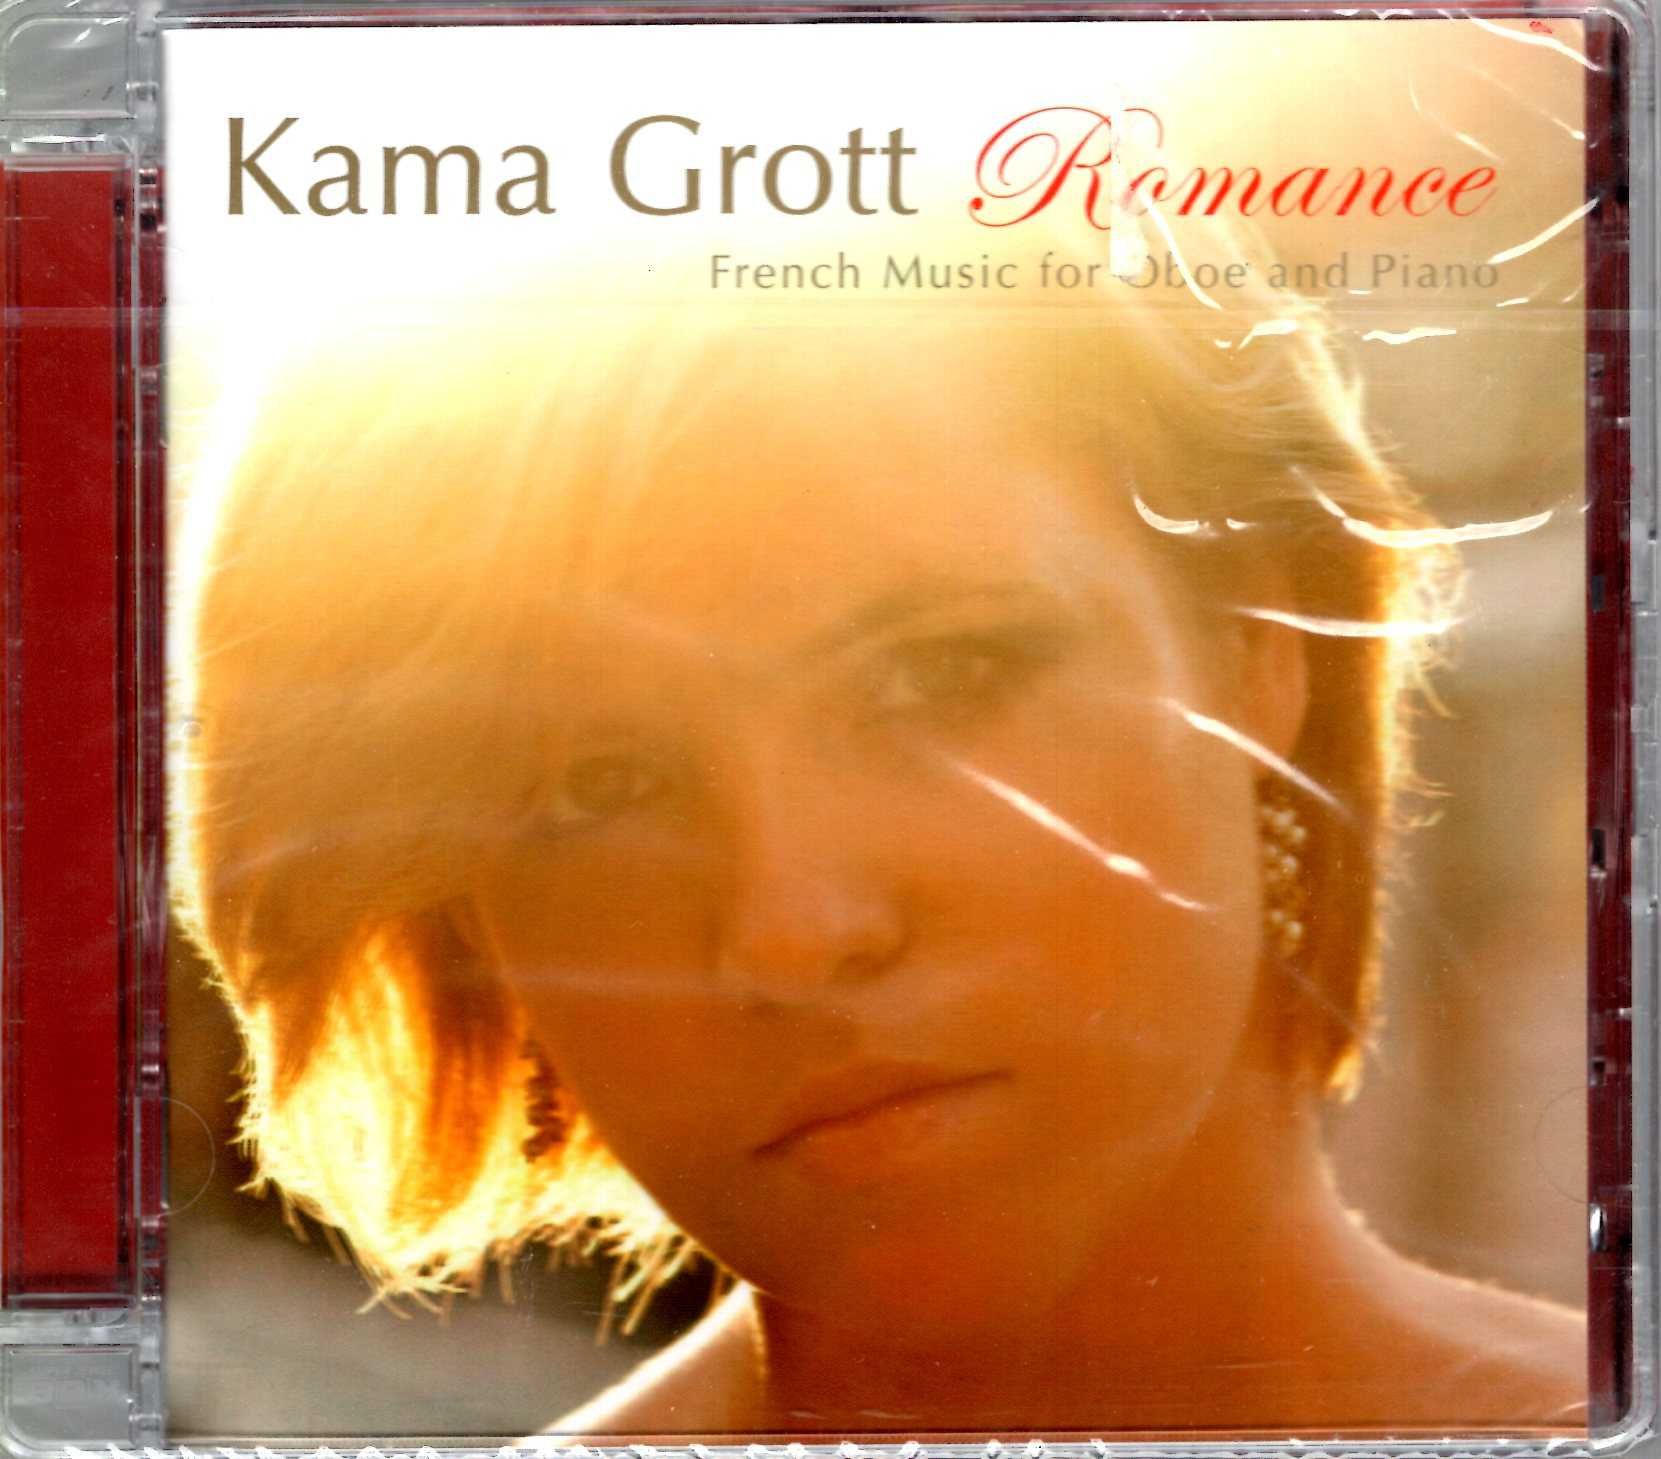 Kama Grott - Romance French Music For Oboe And Piano (CD)